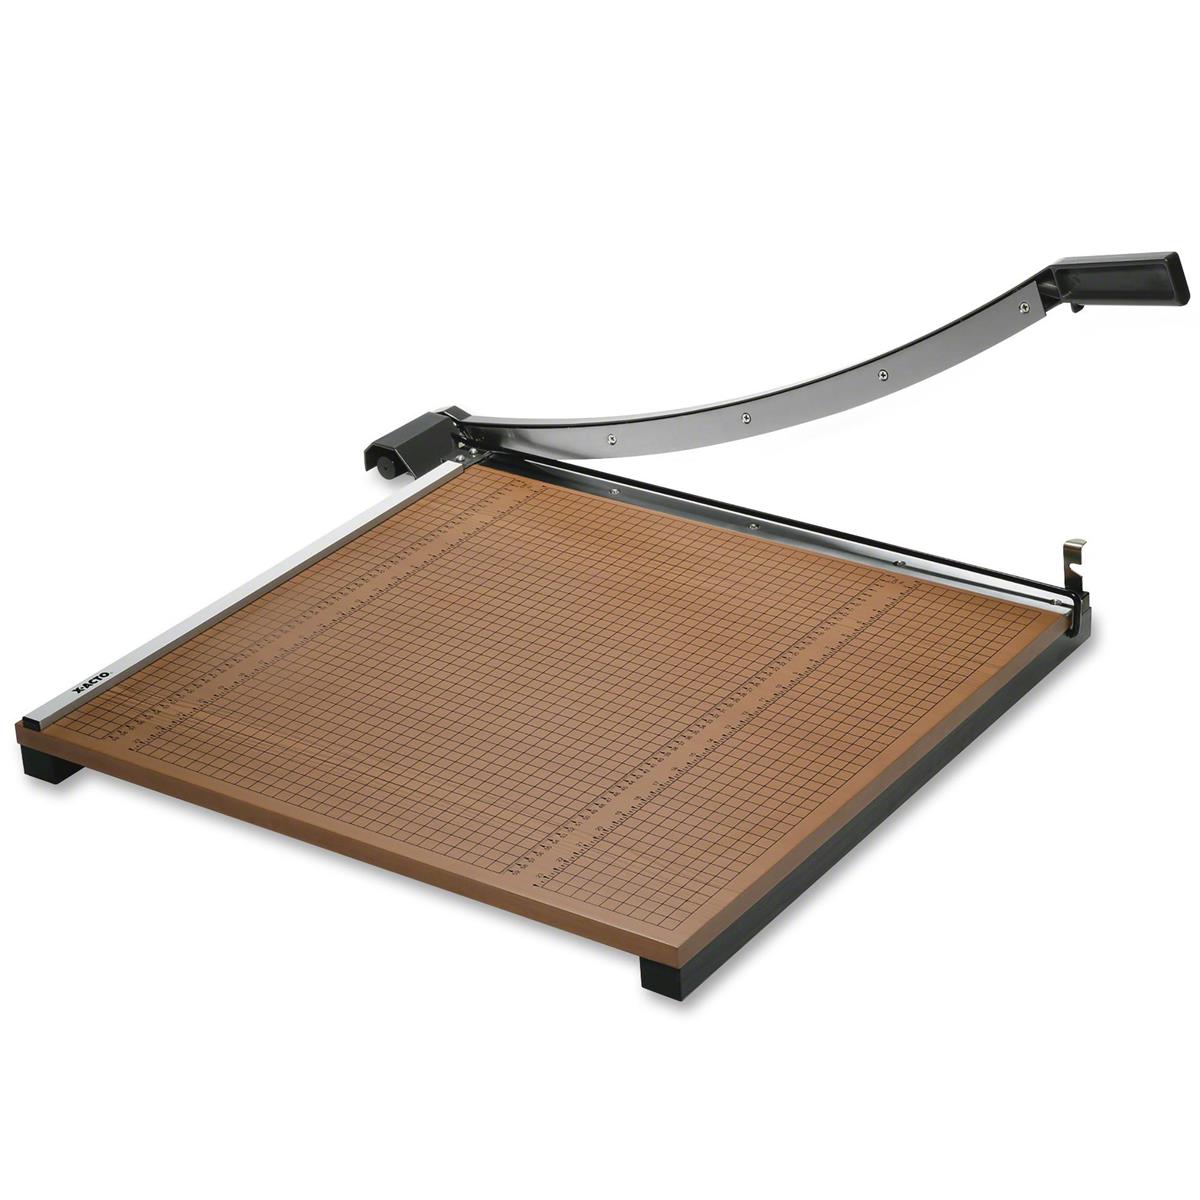 

X-Acto 24x24" Guillotine Square Trimmer - Wood base